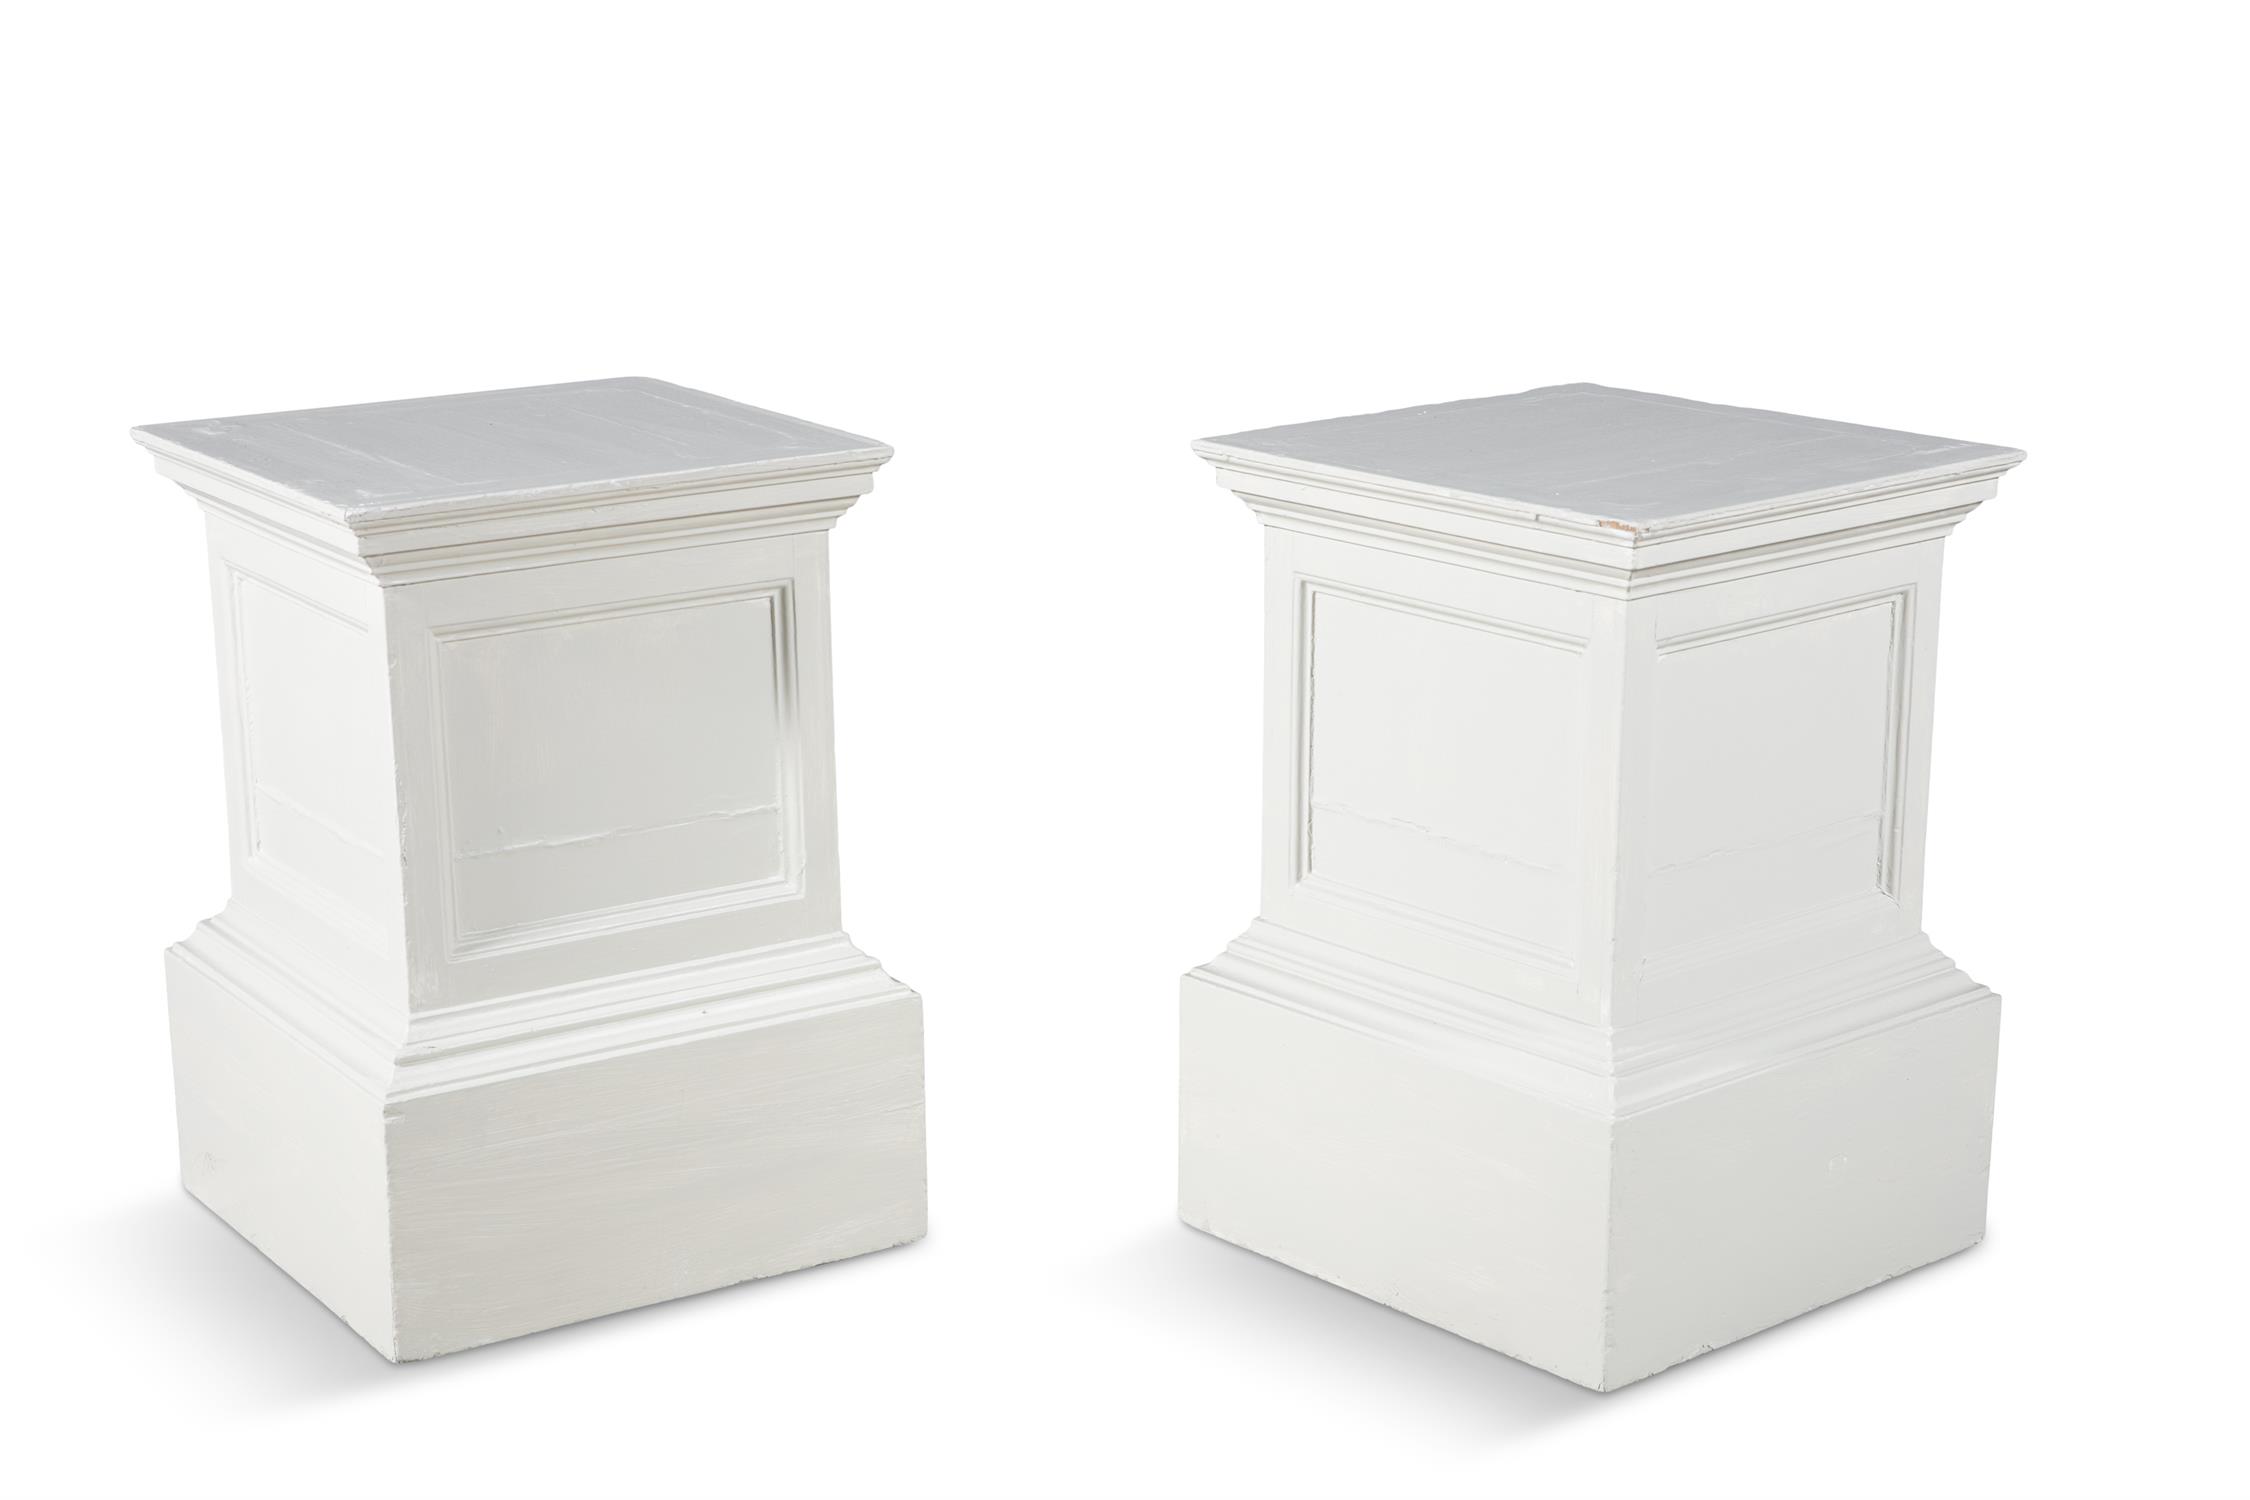 A PAIR OF WHITE PAINTED TIMBER PLINTHS, of squared form, each side with recessed fielded panels.